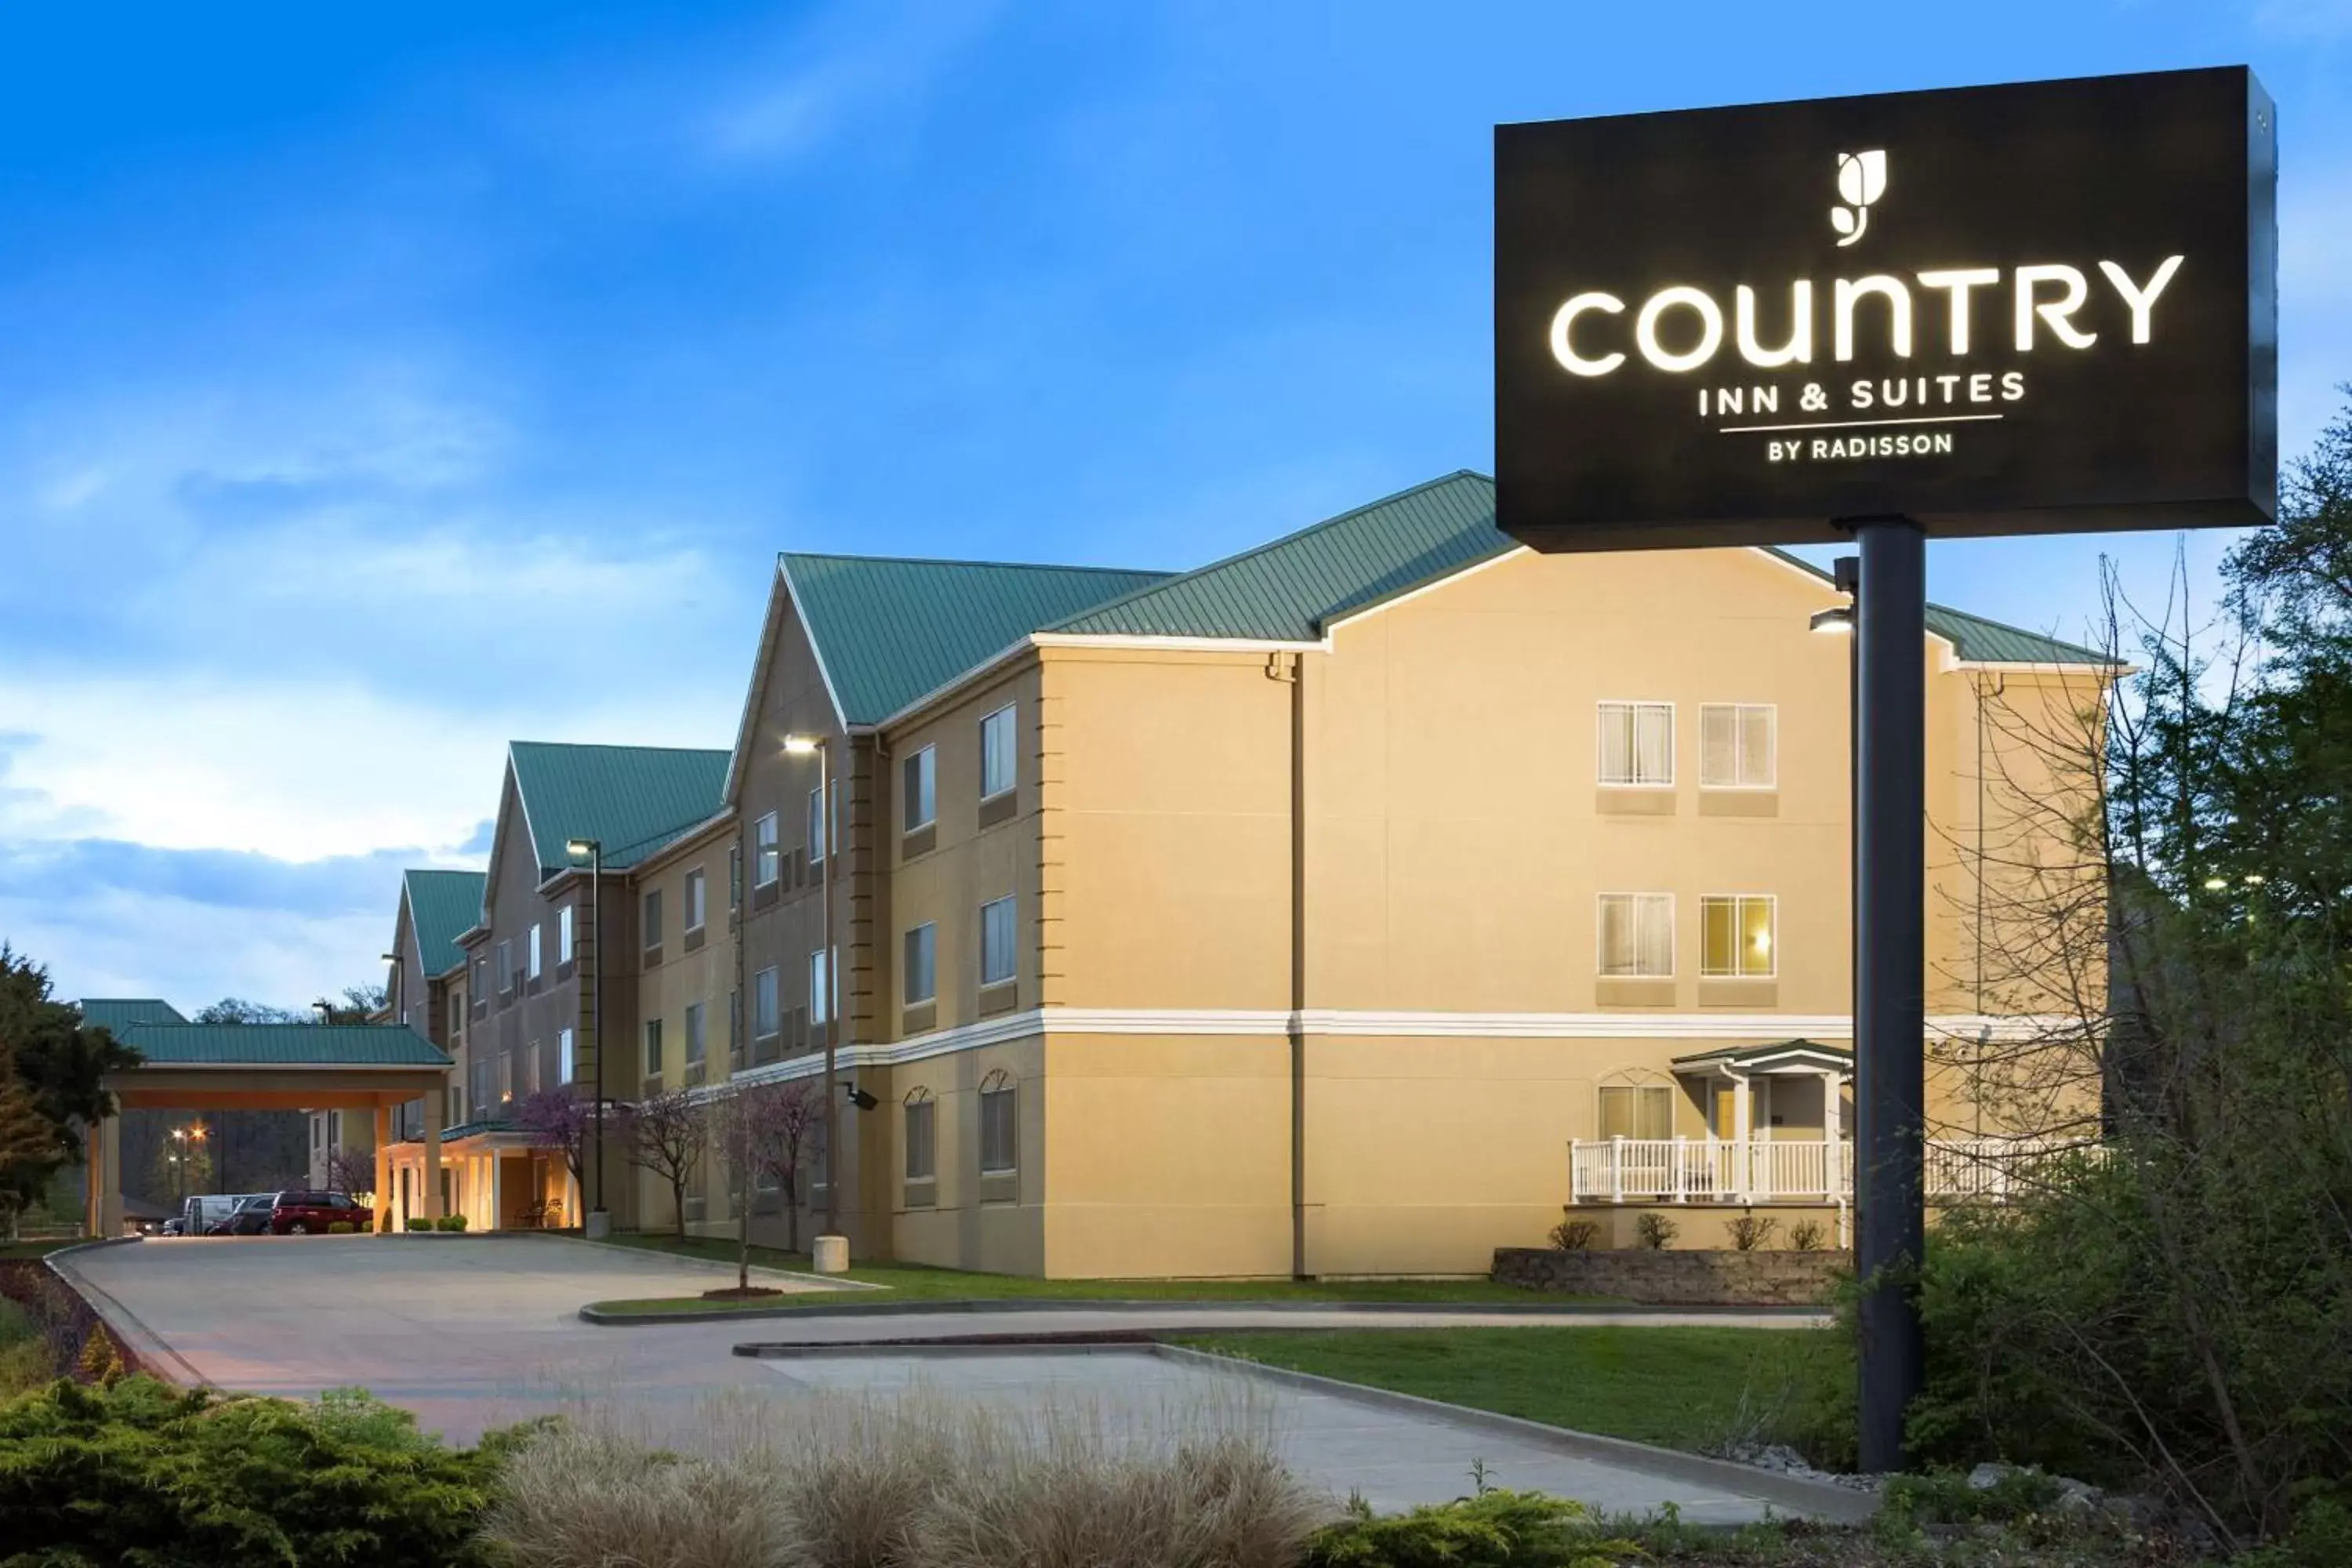 Property building in Country Inn & Suites by Radisson, Columbia, MO